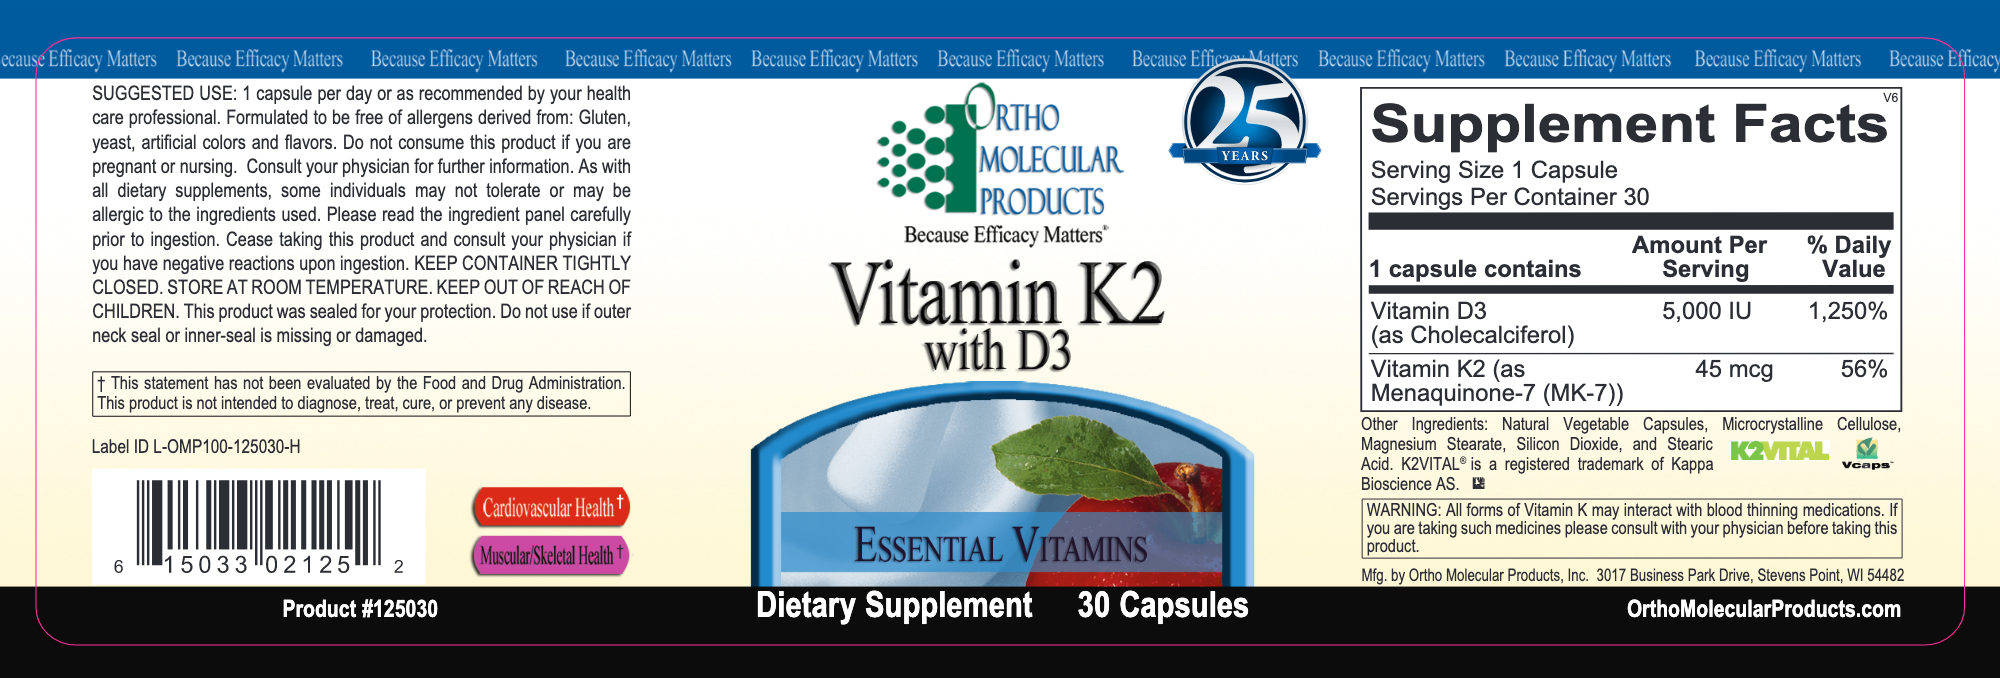 Vitamin K2 with D3-Vitamins & Supplements-Ortho Molecular Products-30 Capsules-Pine Street Clinic